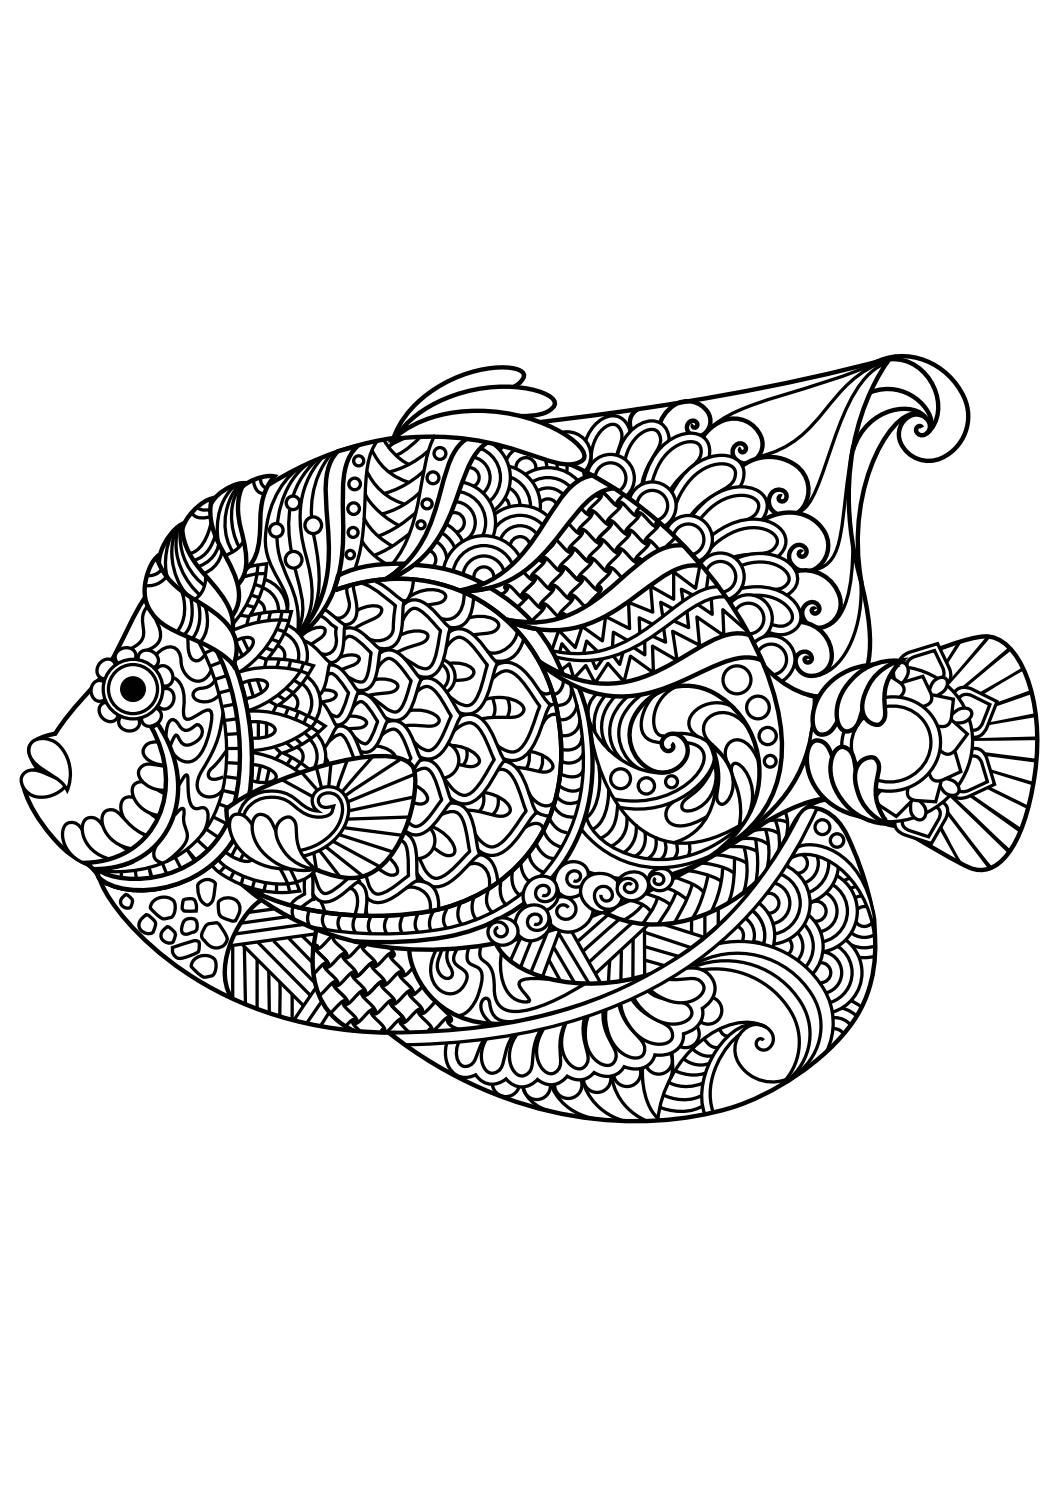 Free Adult Coloring Book Pdf
 Animal coloring pages pdf